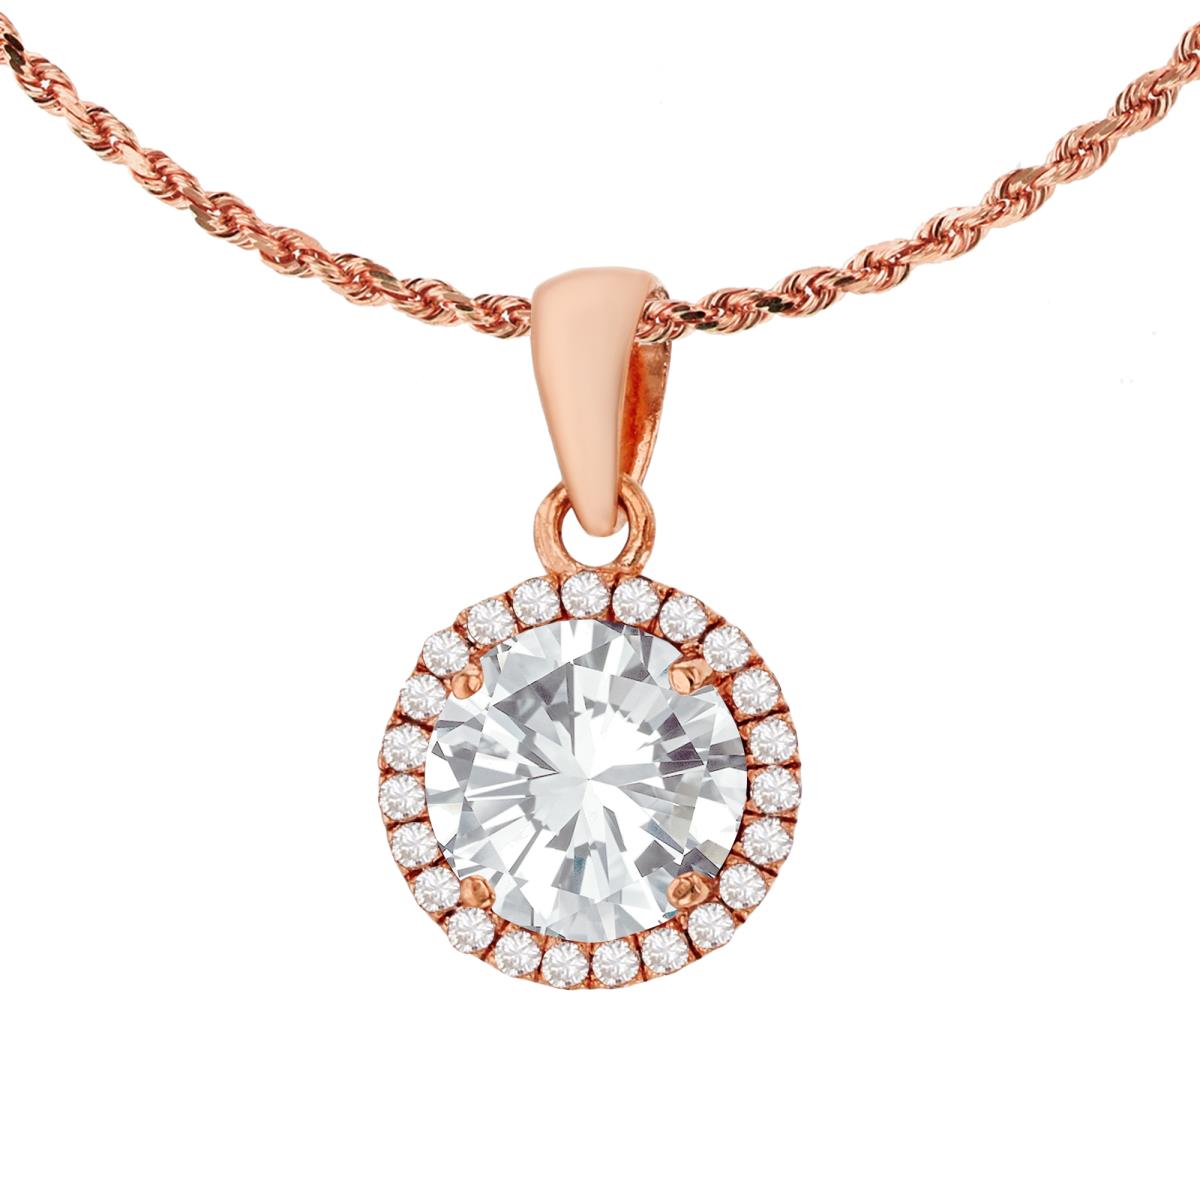 10K Rose Gold 7mm Round White Topaz & 0.12 CTTW Diamond Halo 18" Rope Chain Necklace